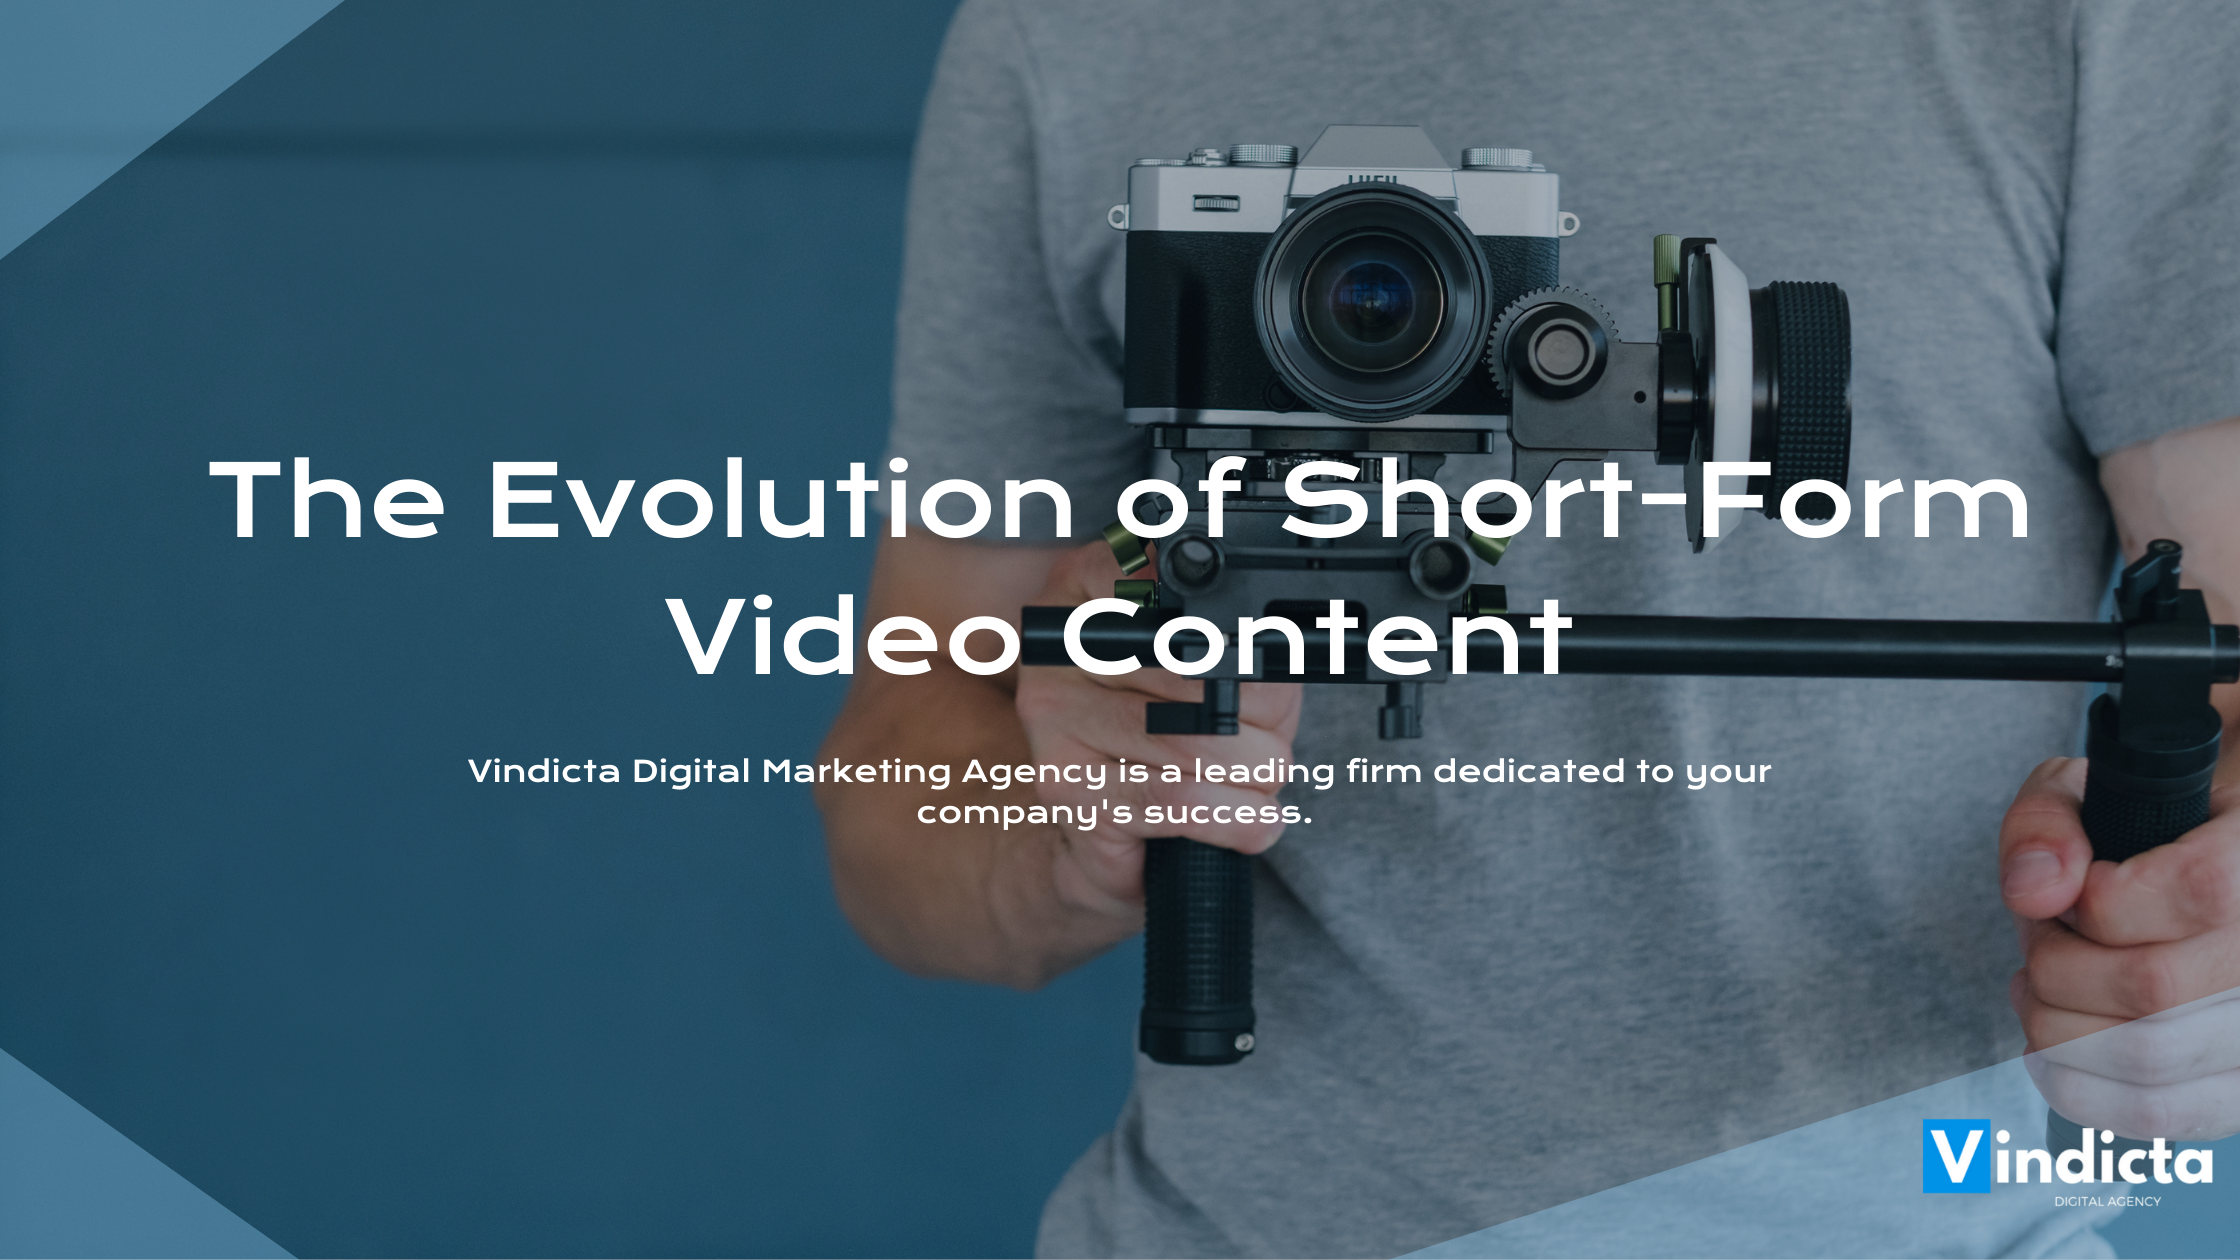 The Evolution of Short-Form Video Content